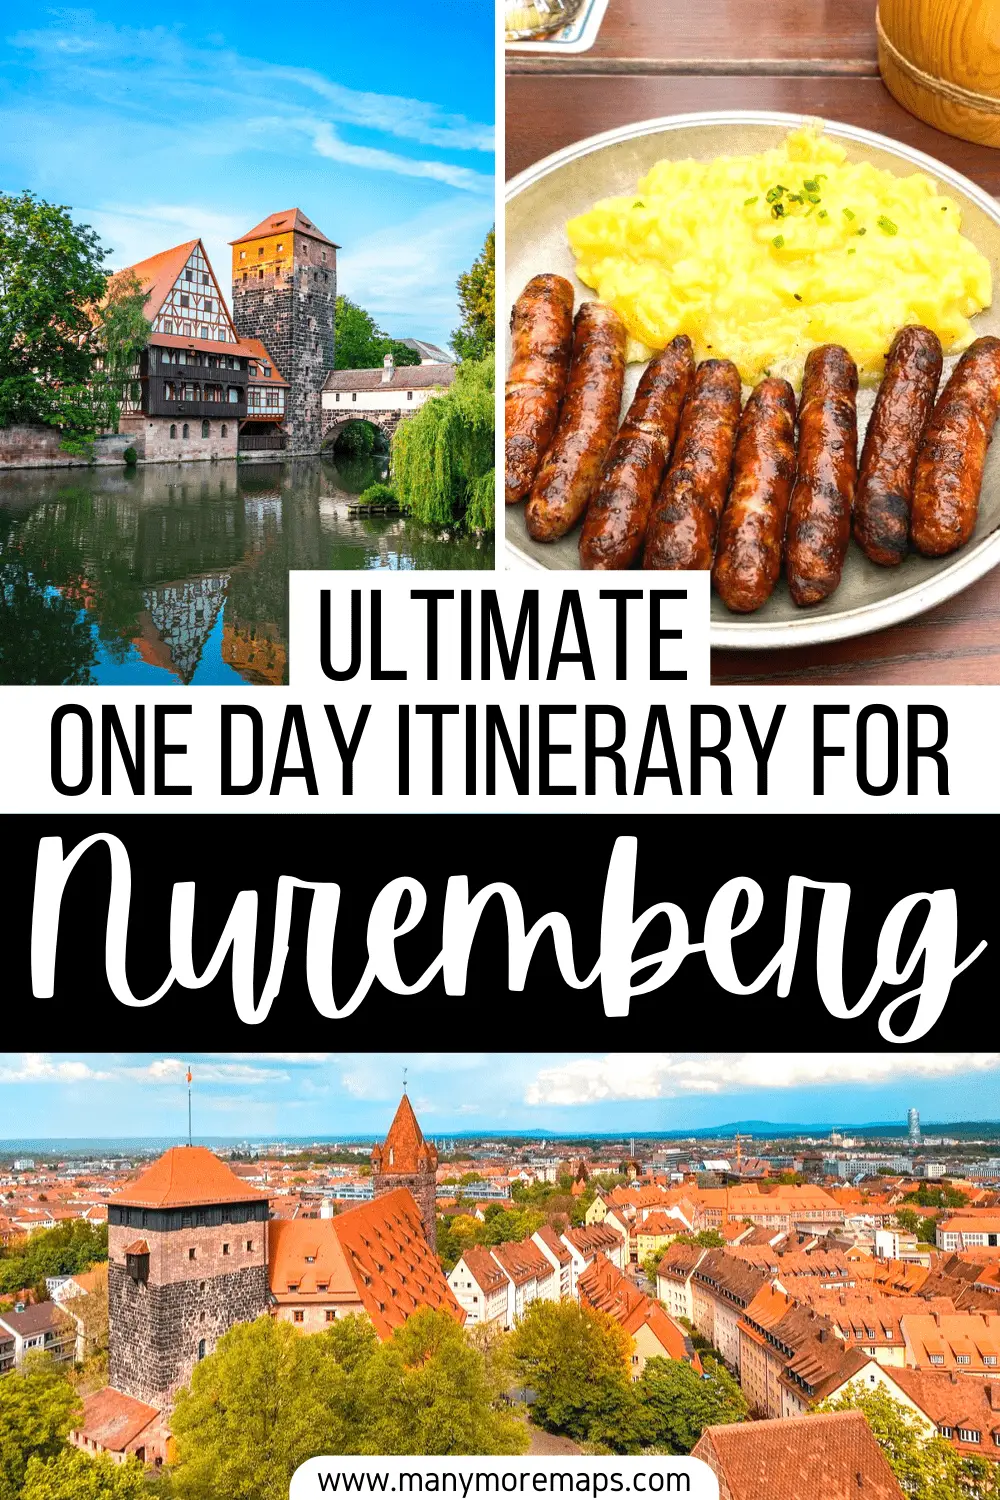 Planning a trip to Bavaria, Germany and want to spend one day or a day trip in Nuremberg? This travel guide will cover all of the best things to do and see in Nuremberg, including the best museums and restaurants.